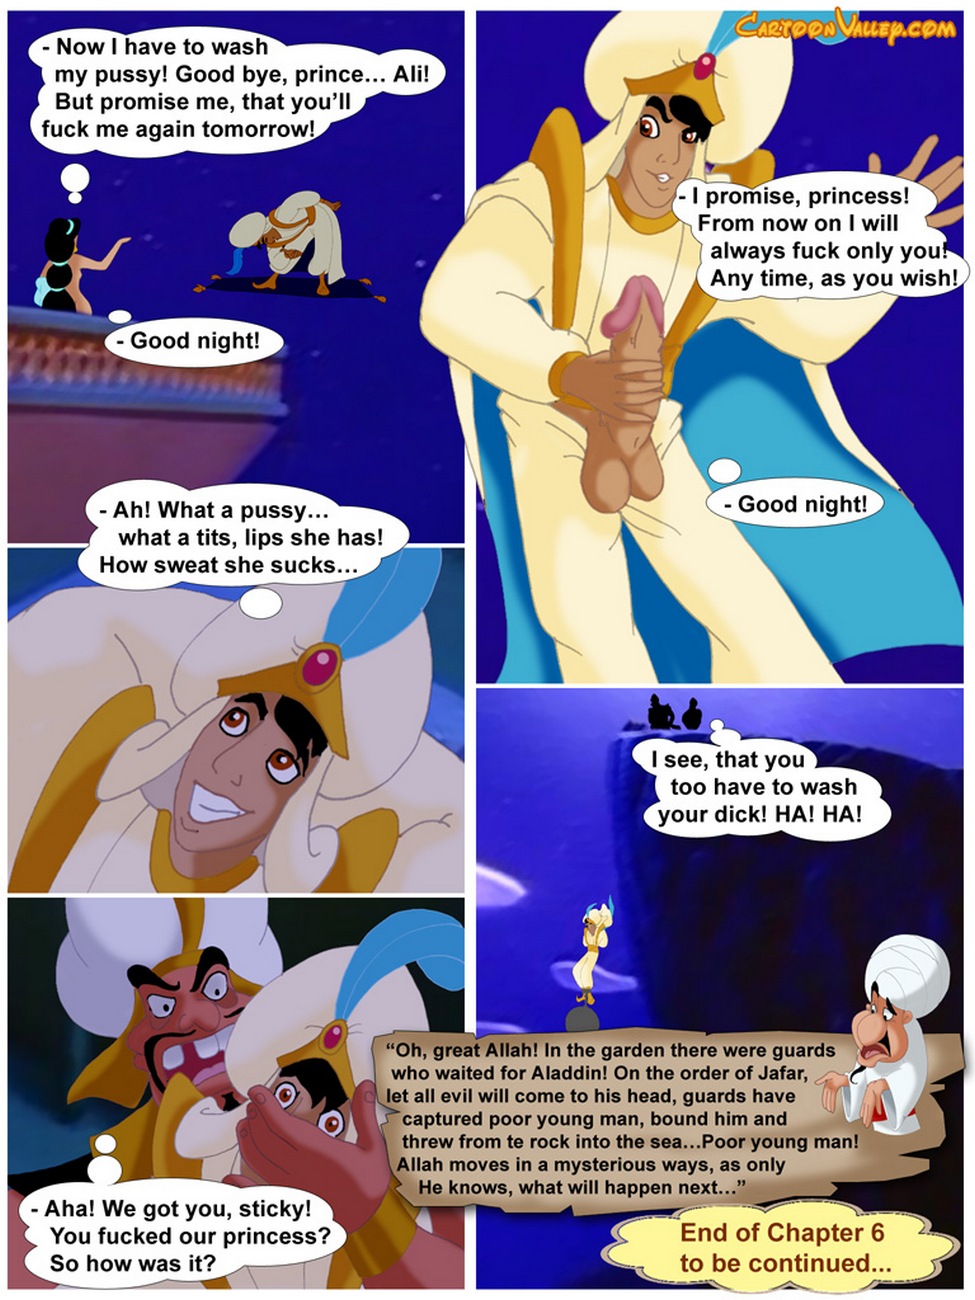 Aladdin - The Fucker From Agrabah - part 5